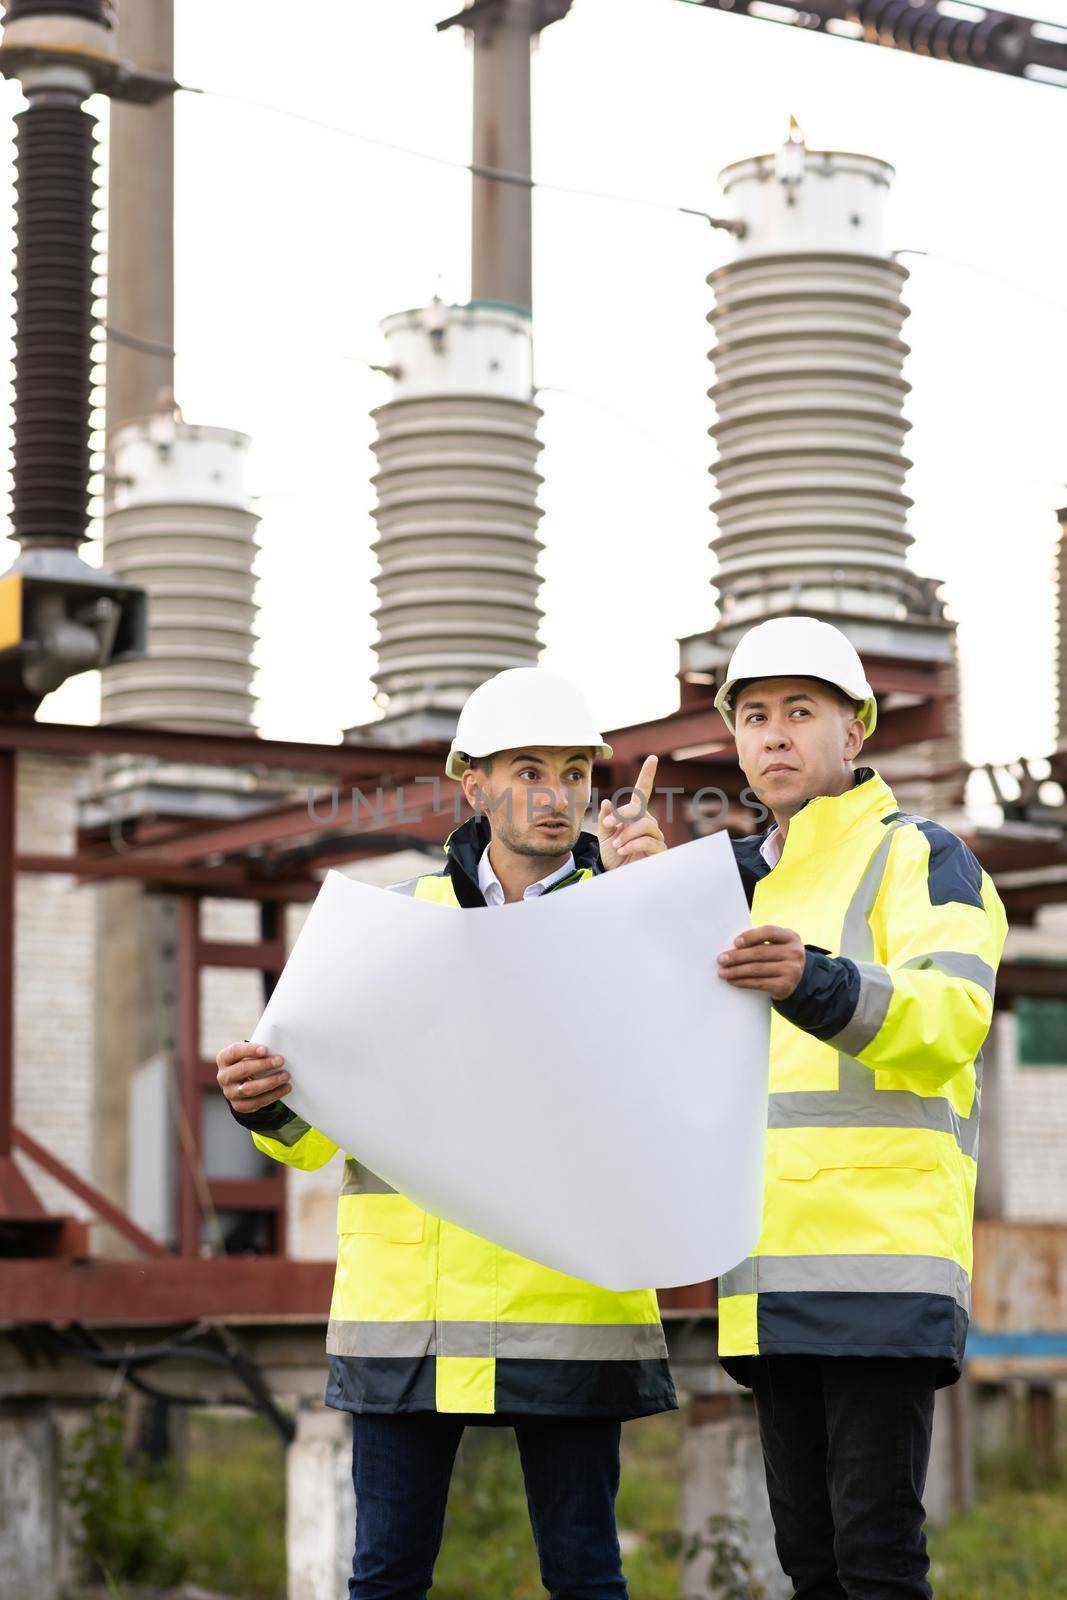 Engineers near high-voltage powerline working with a construction plan. Two engineers in special clothing discuss a drawing on paper against the background of a high-voltage power line.